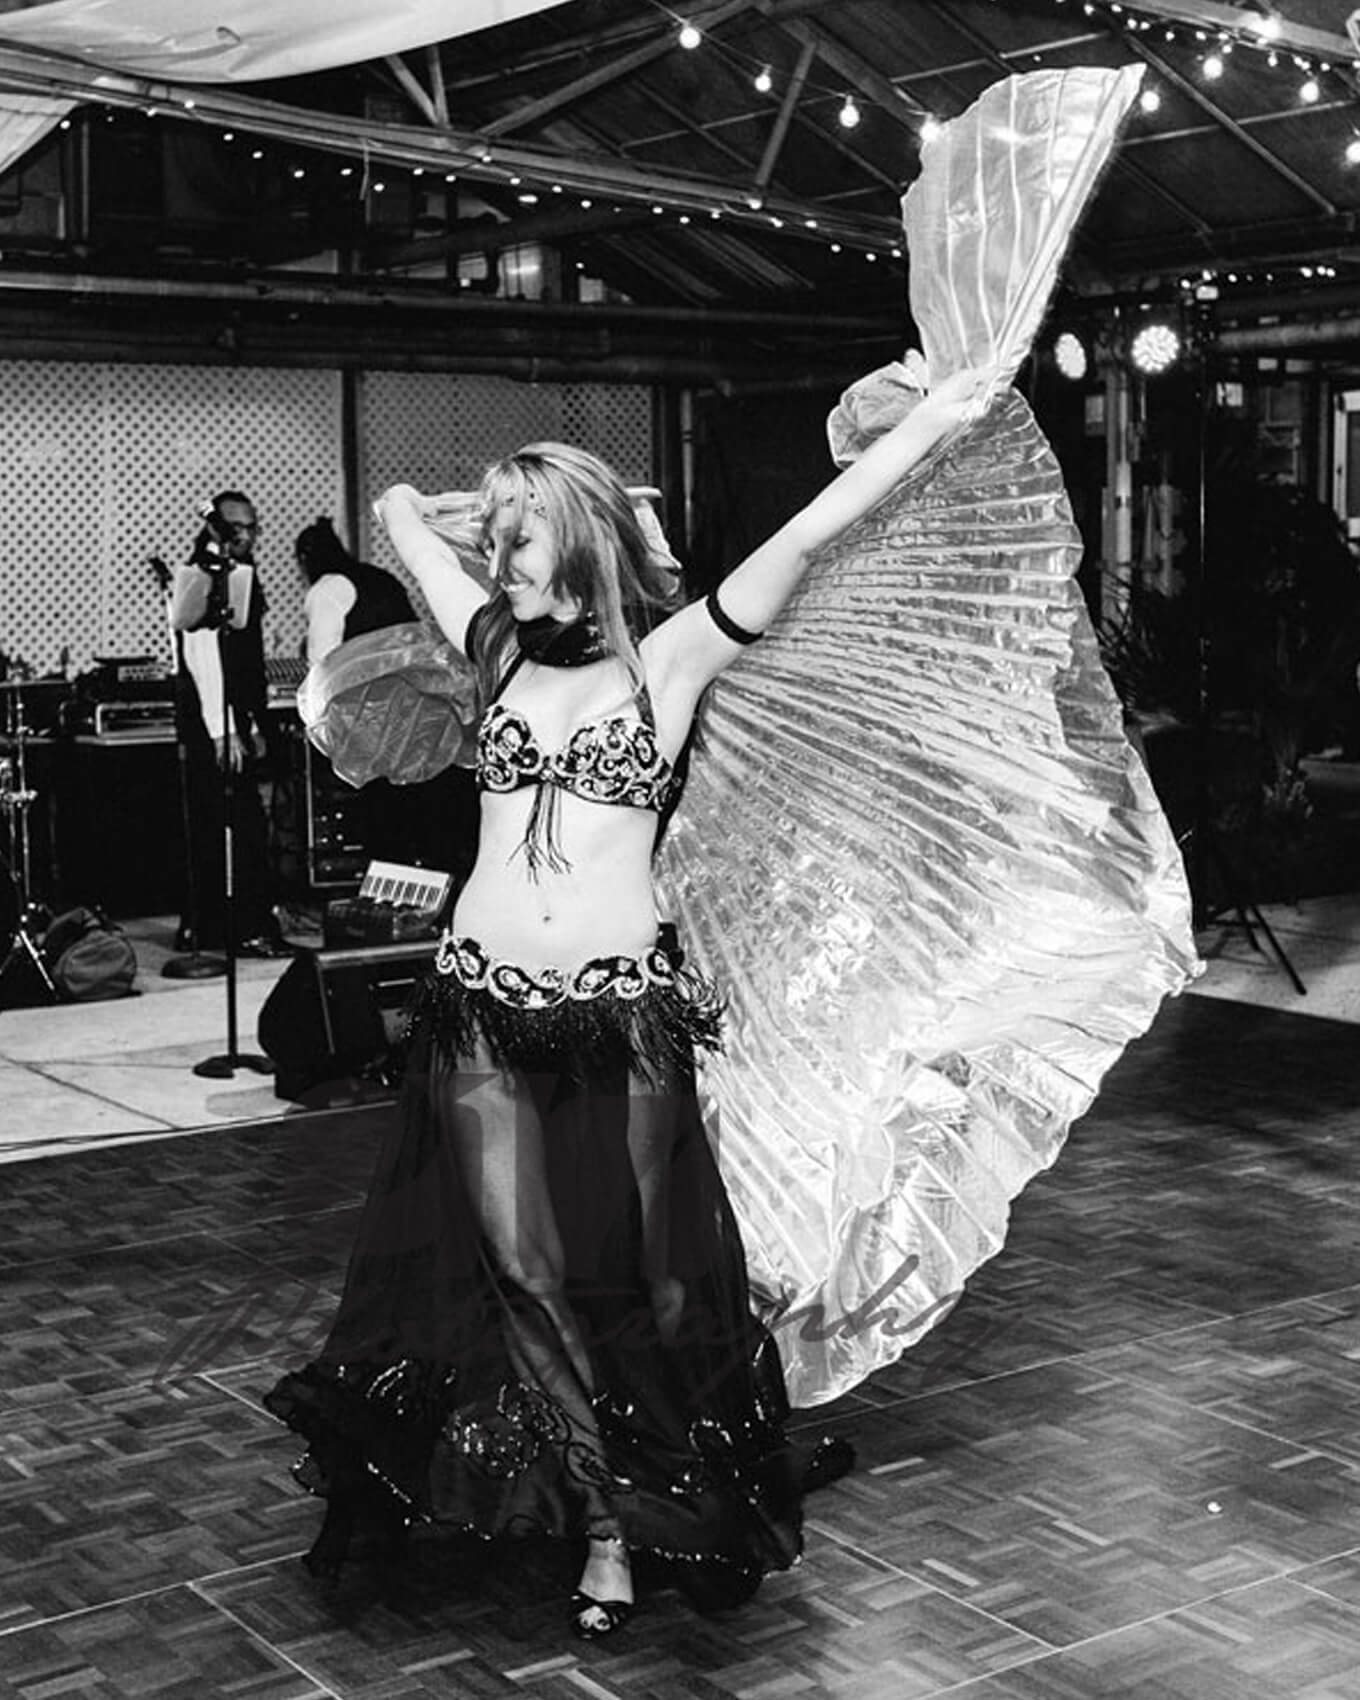 Donna using isis wings at an event